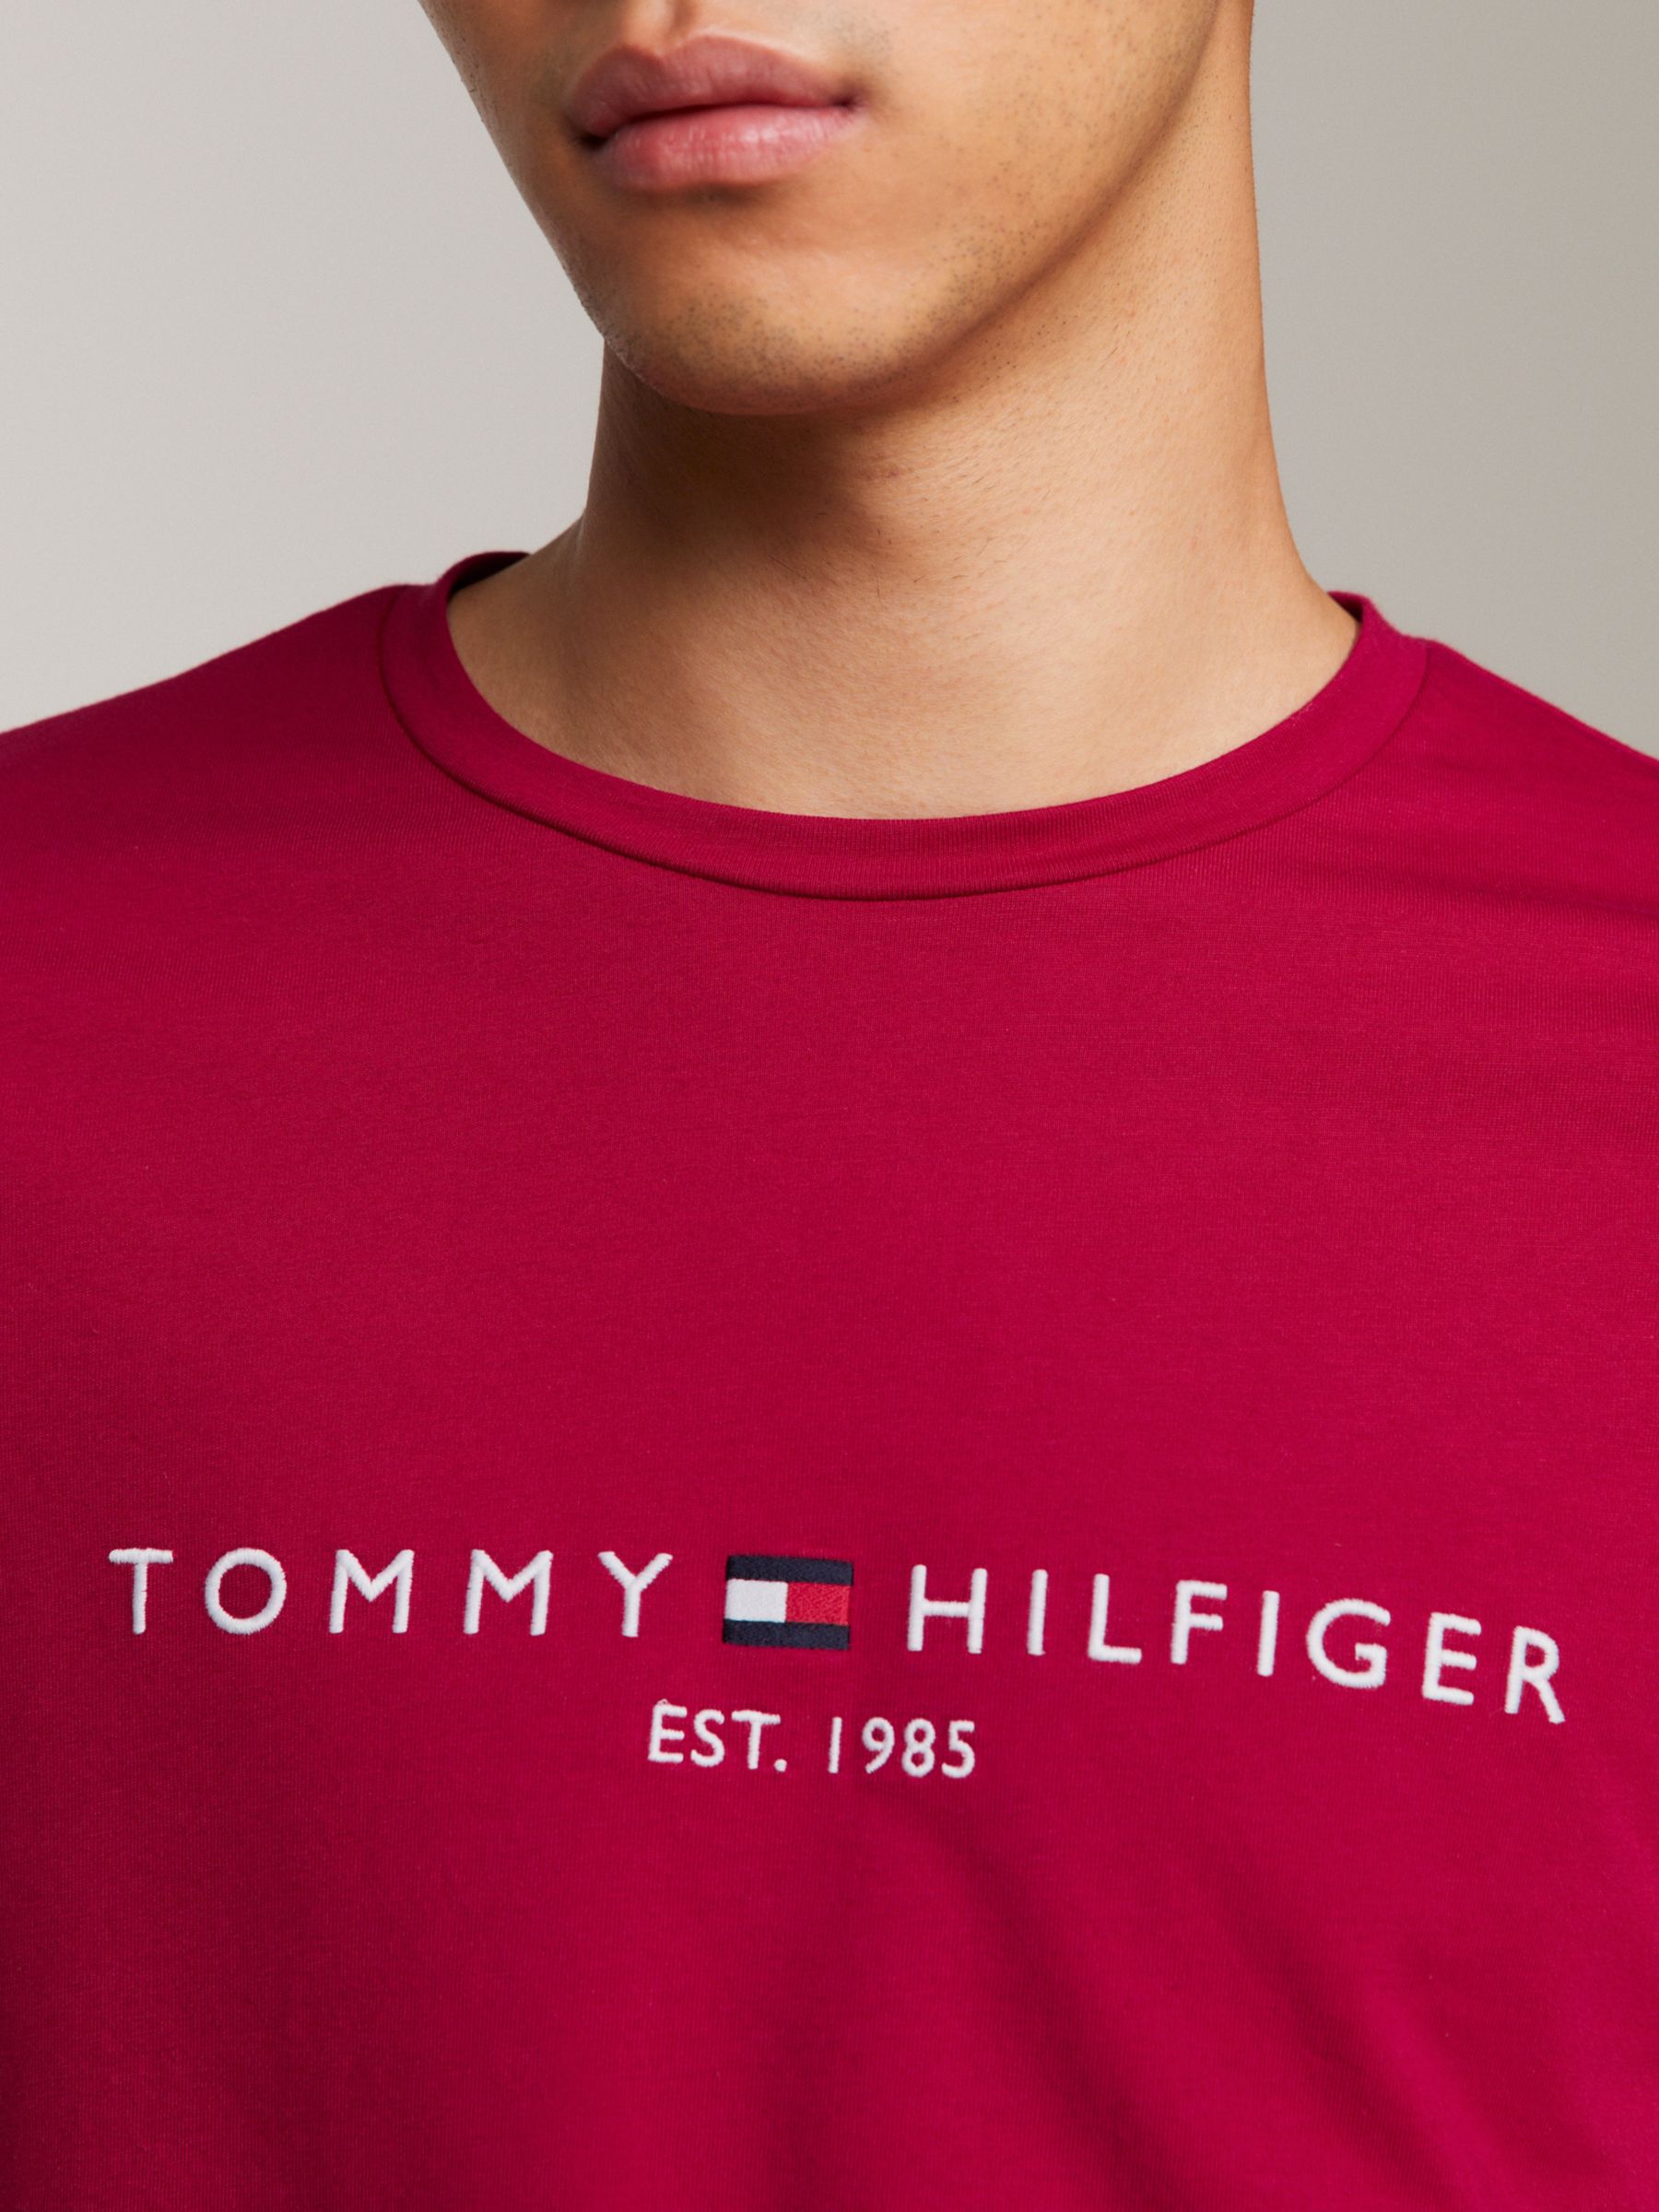 Tommy Hilfiger Tommy Logo T-Shirt, Royal Berry at John Lewis & Partners